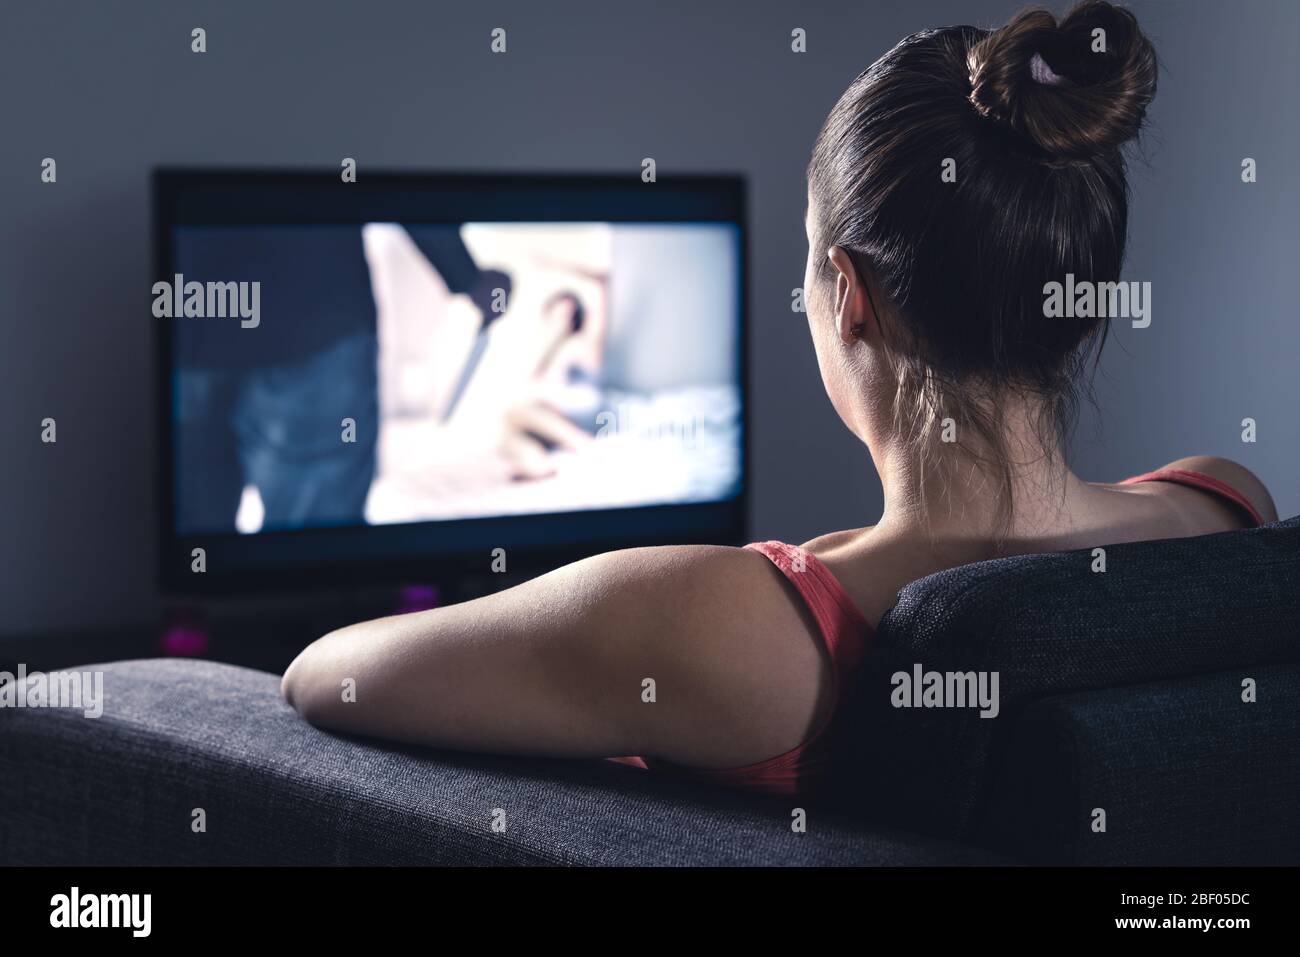 Young woman watching horror movie on online stream service. Girl streaming scary film or series at night. Fear and terror during thriller on tv. Stock Photo